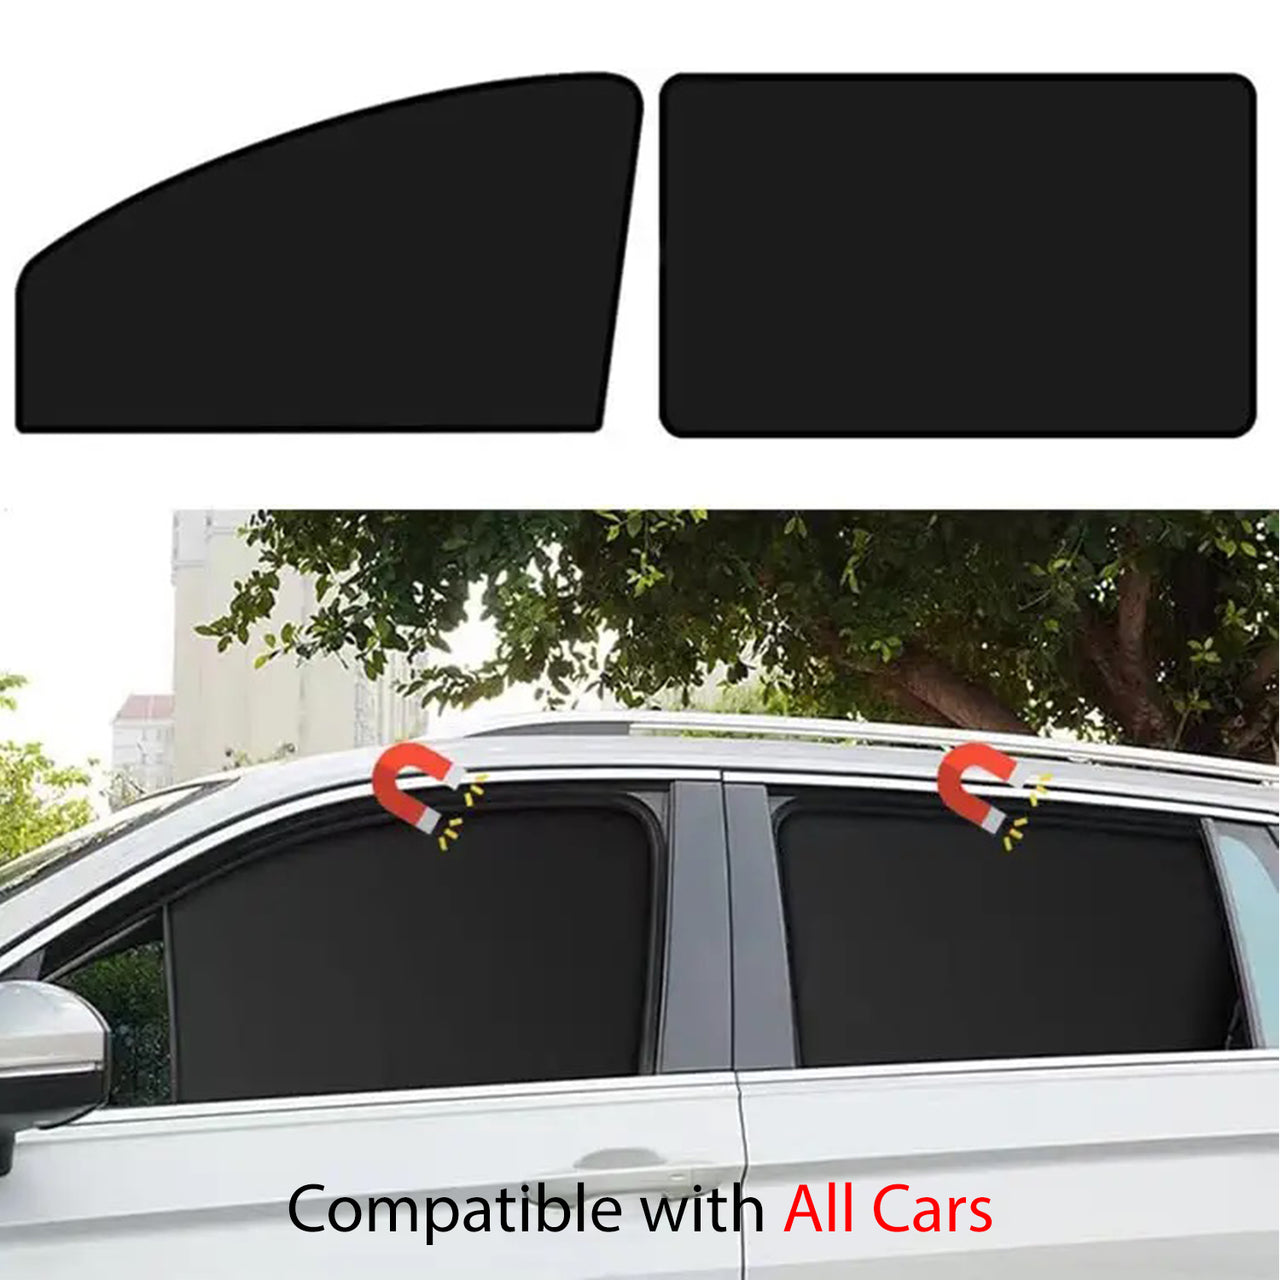 Car Side Window Sun Shades, Custom Fit For Your Cars, Window Sunshades Privacy Curtains, 100% Block Light for Breastfeeding, Taking a nap, Changing Clothes, Camping NS15980